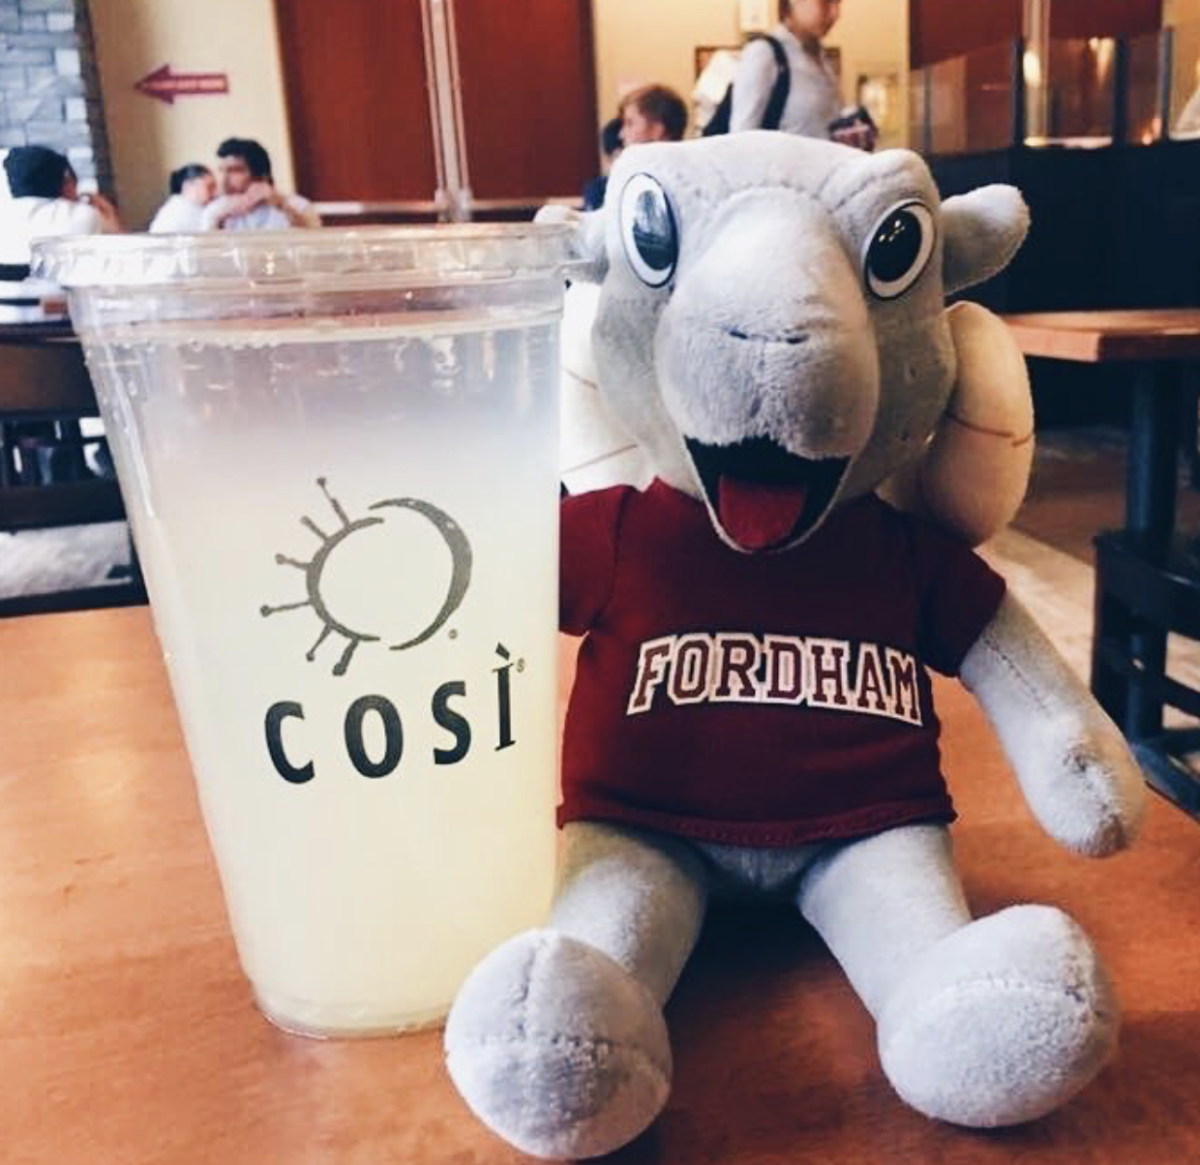 Cosi is a popular dining spot for Fordham students. (Courtesy of Instagram)